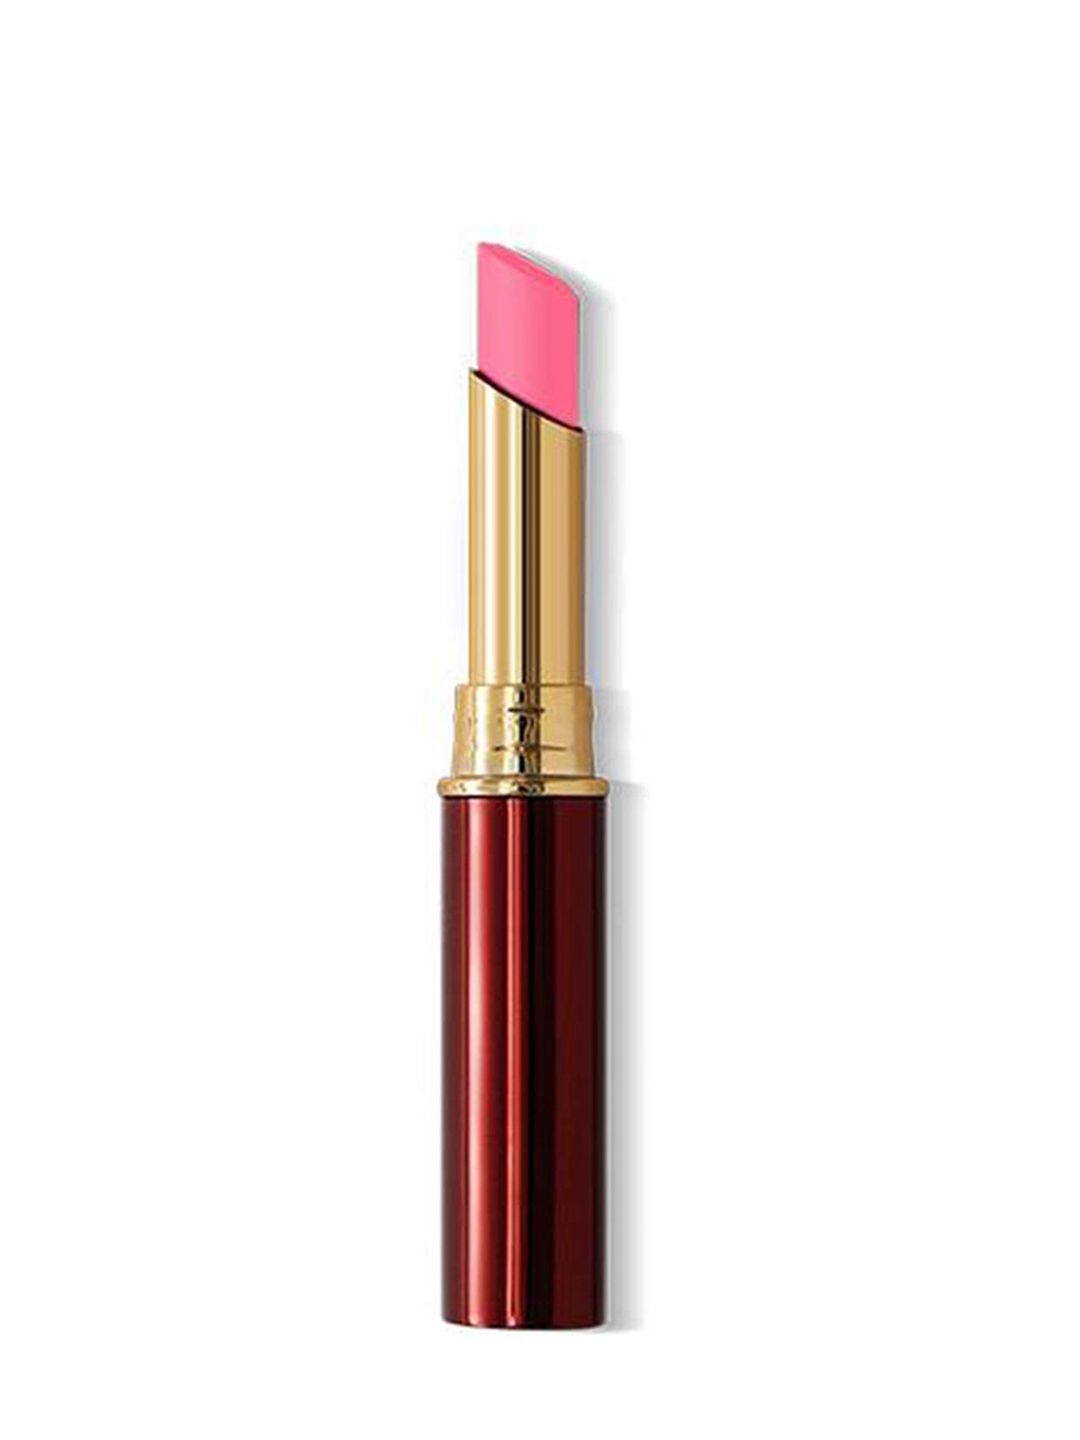 Charmacy Milano Longstay & Waterproof Matte Lipstick - Crime Time 62 Price in India